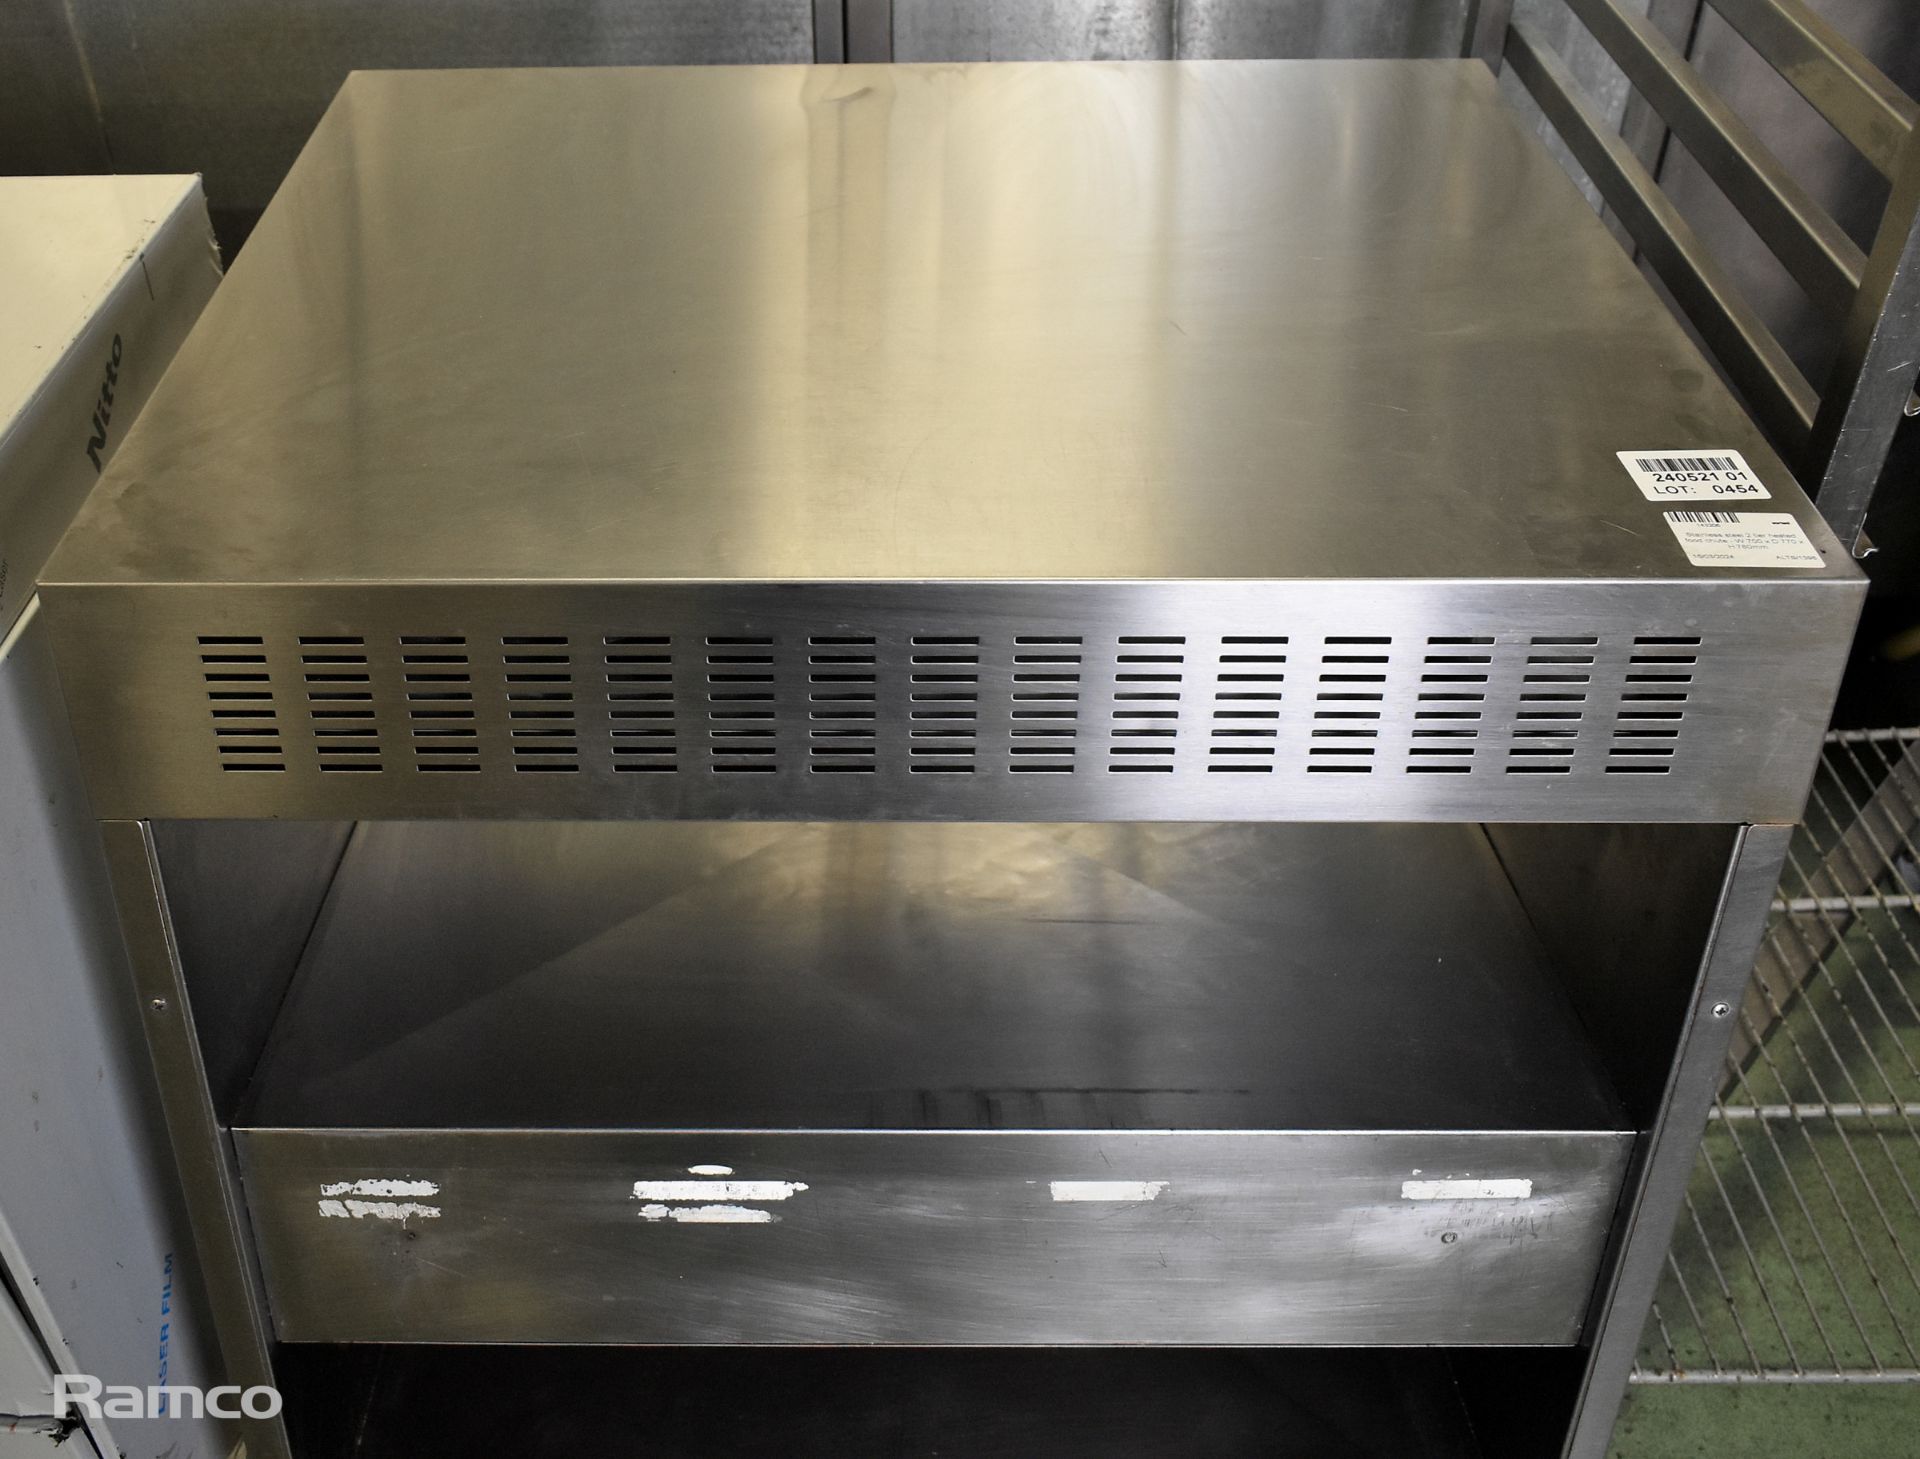 Stainless steel 2 tier heated food chute - W 700 x D 770 x H 780mm - Image 5 of 7